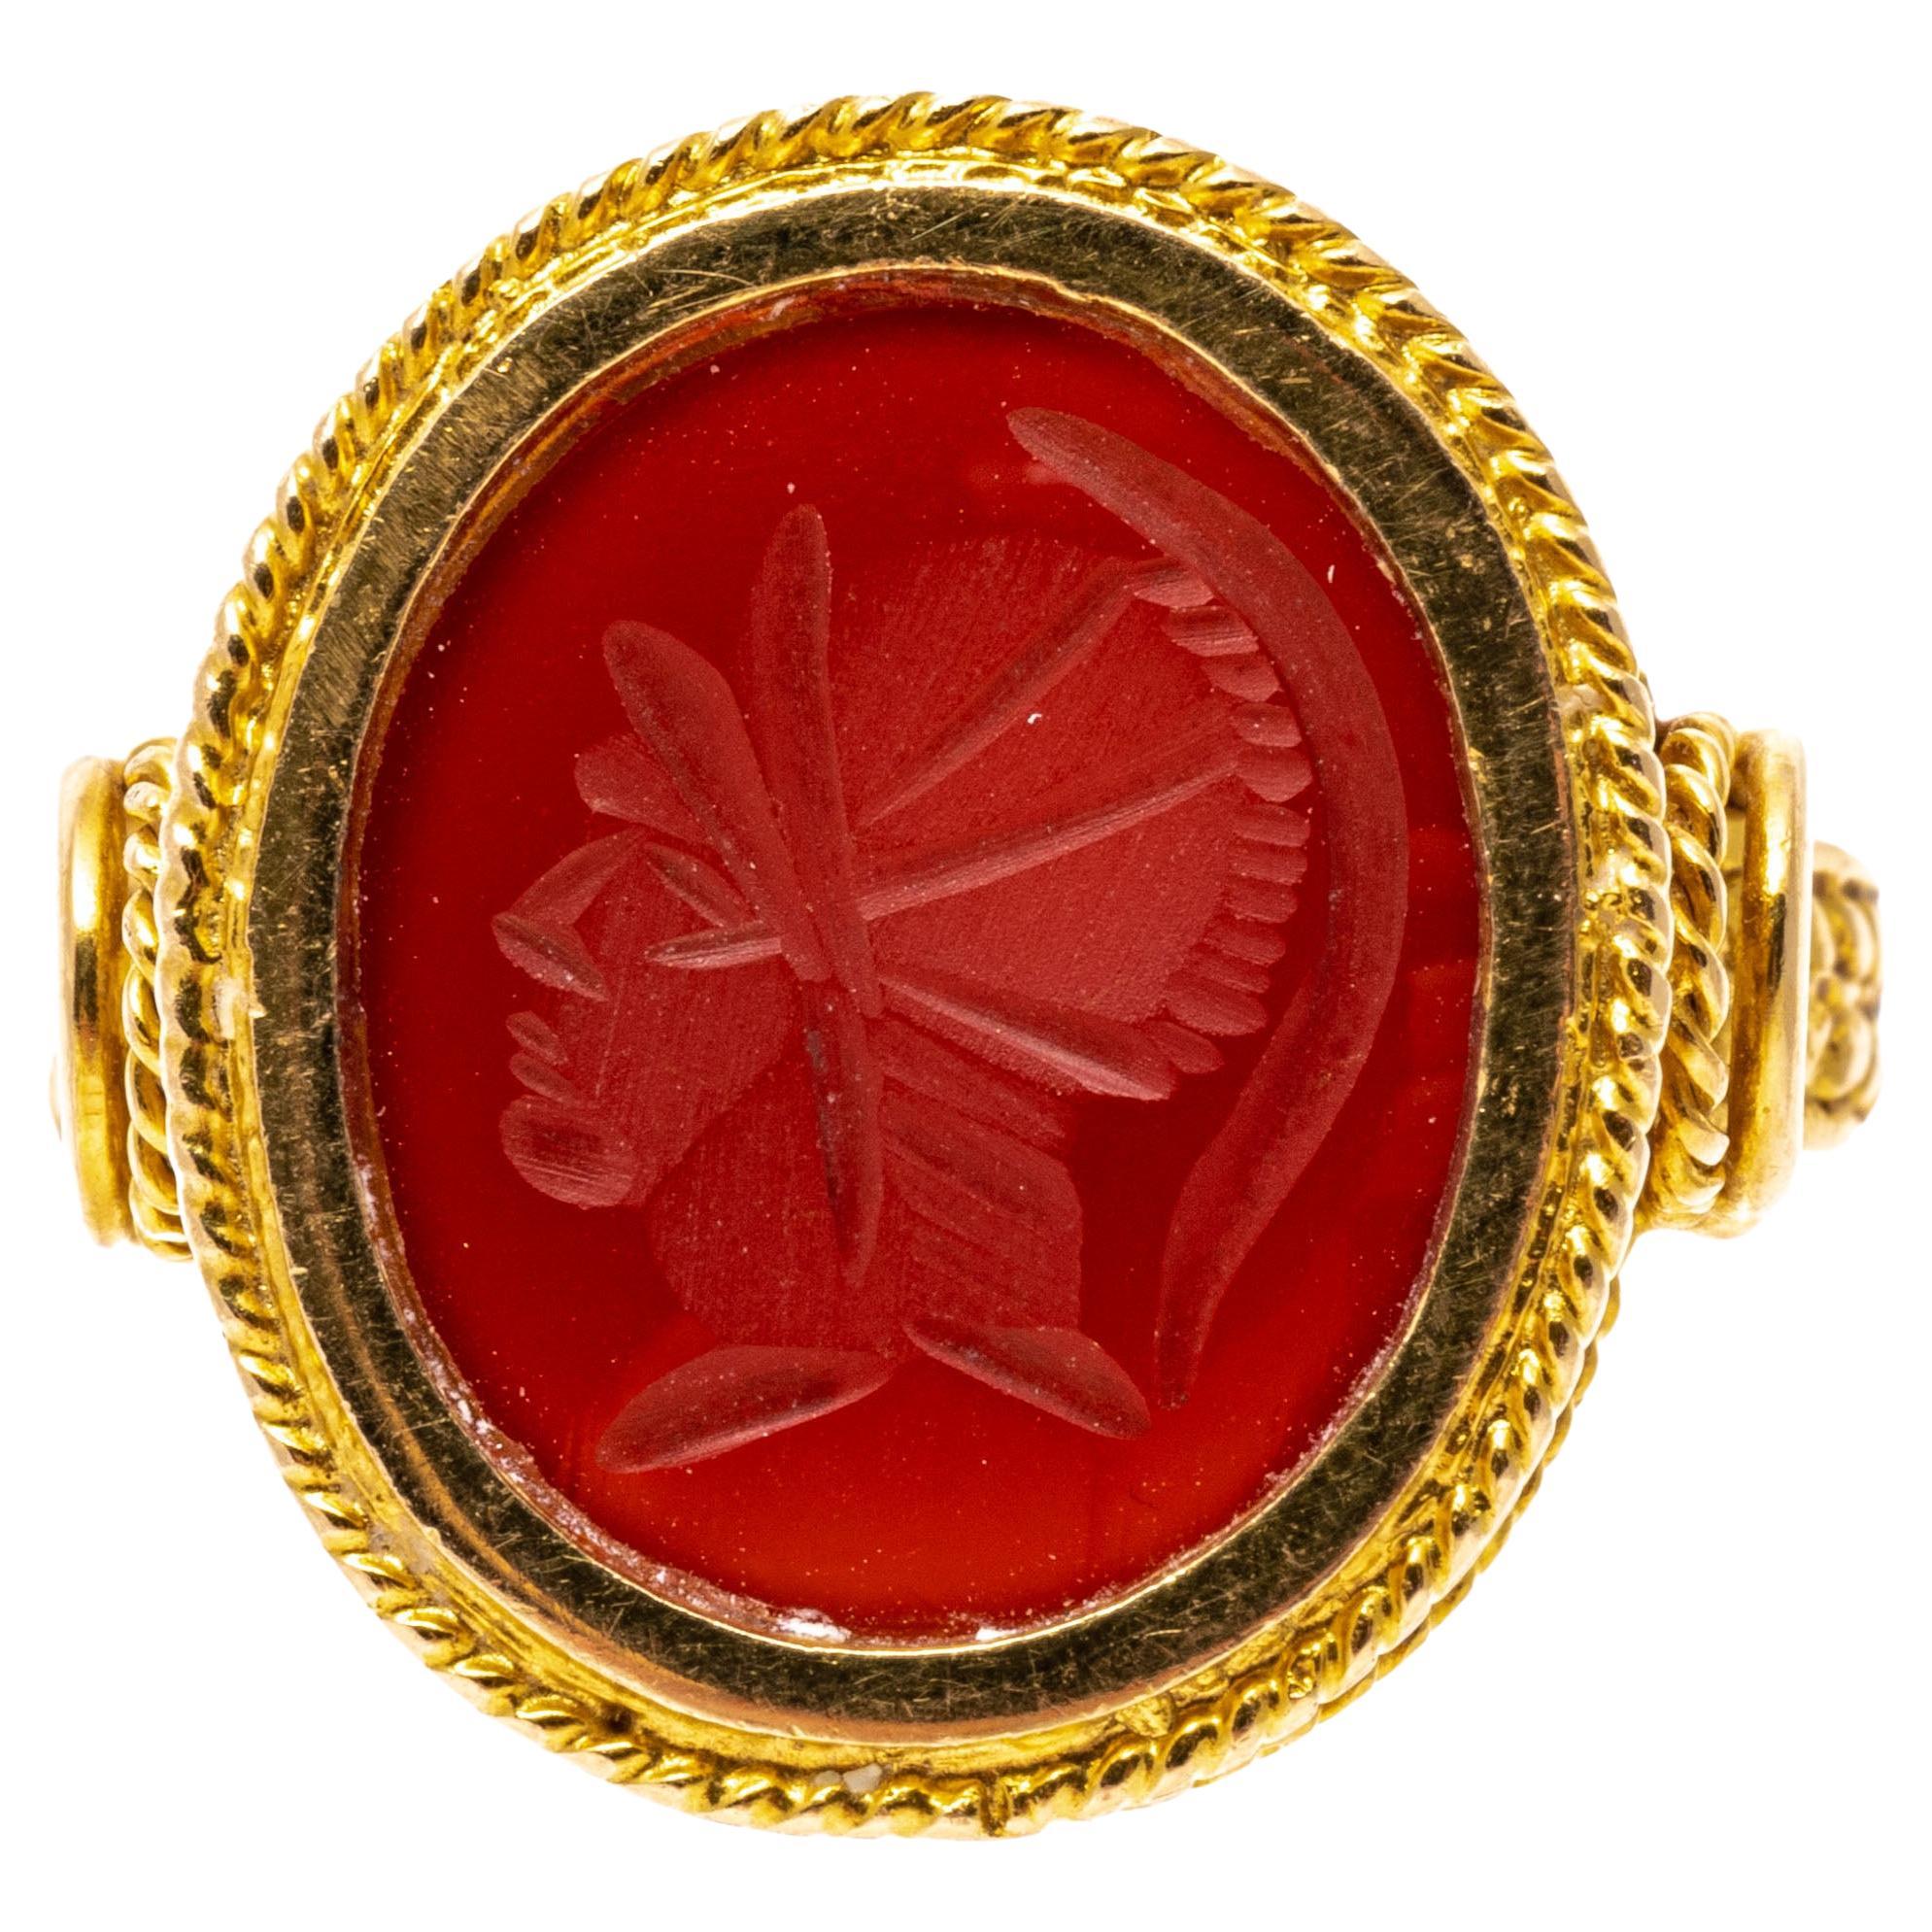 What is an intaglio ring?